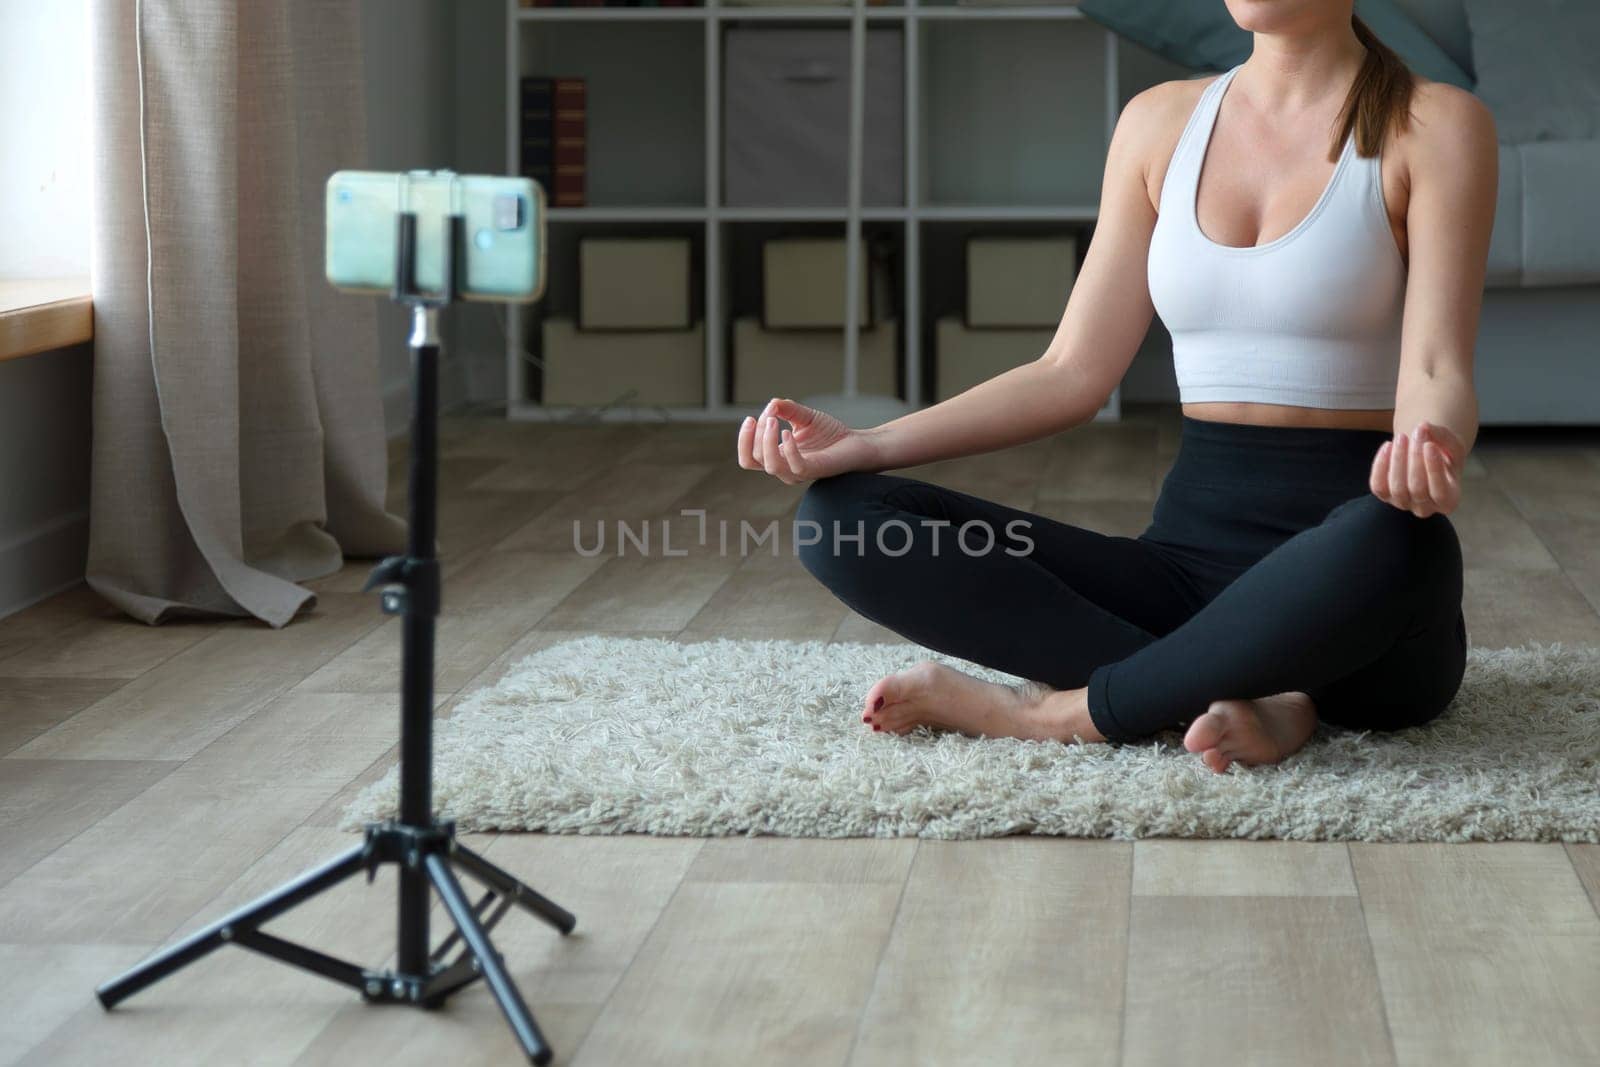 woman doing yoga at home on the carpet, sitting in lotus position with her phone and tripod for recording videos or live streaming for an online fitness center class through a social media platform. She is sitting in the style of lotus position